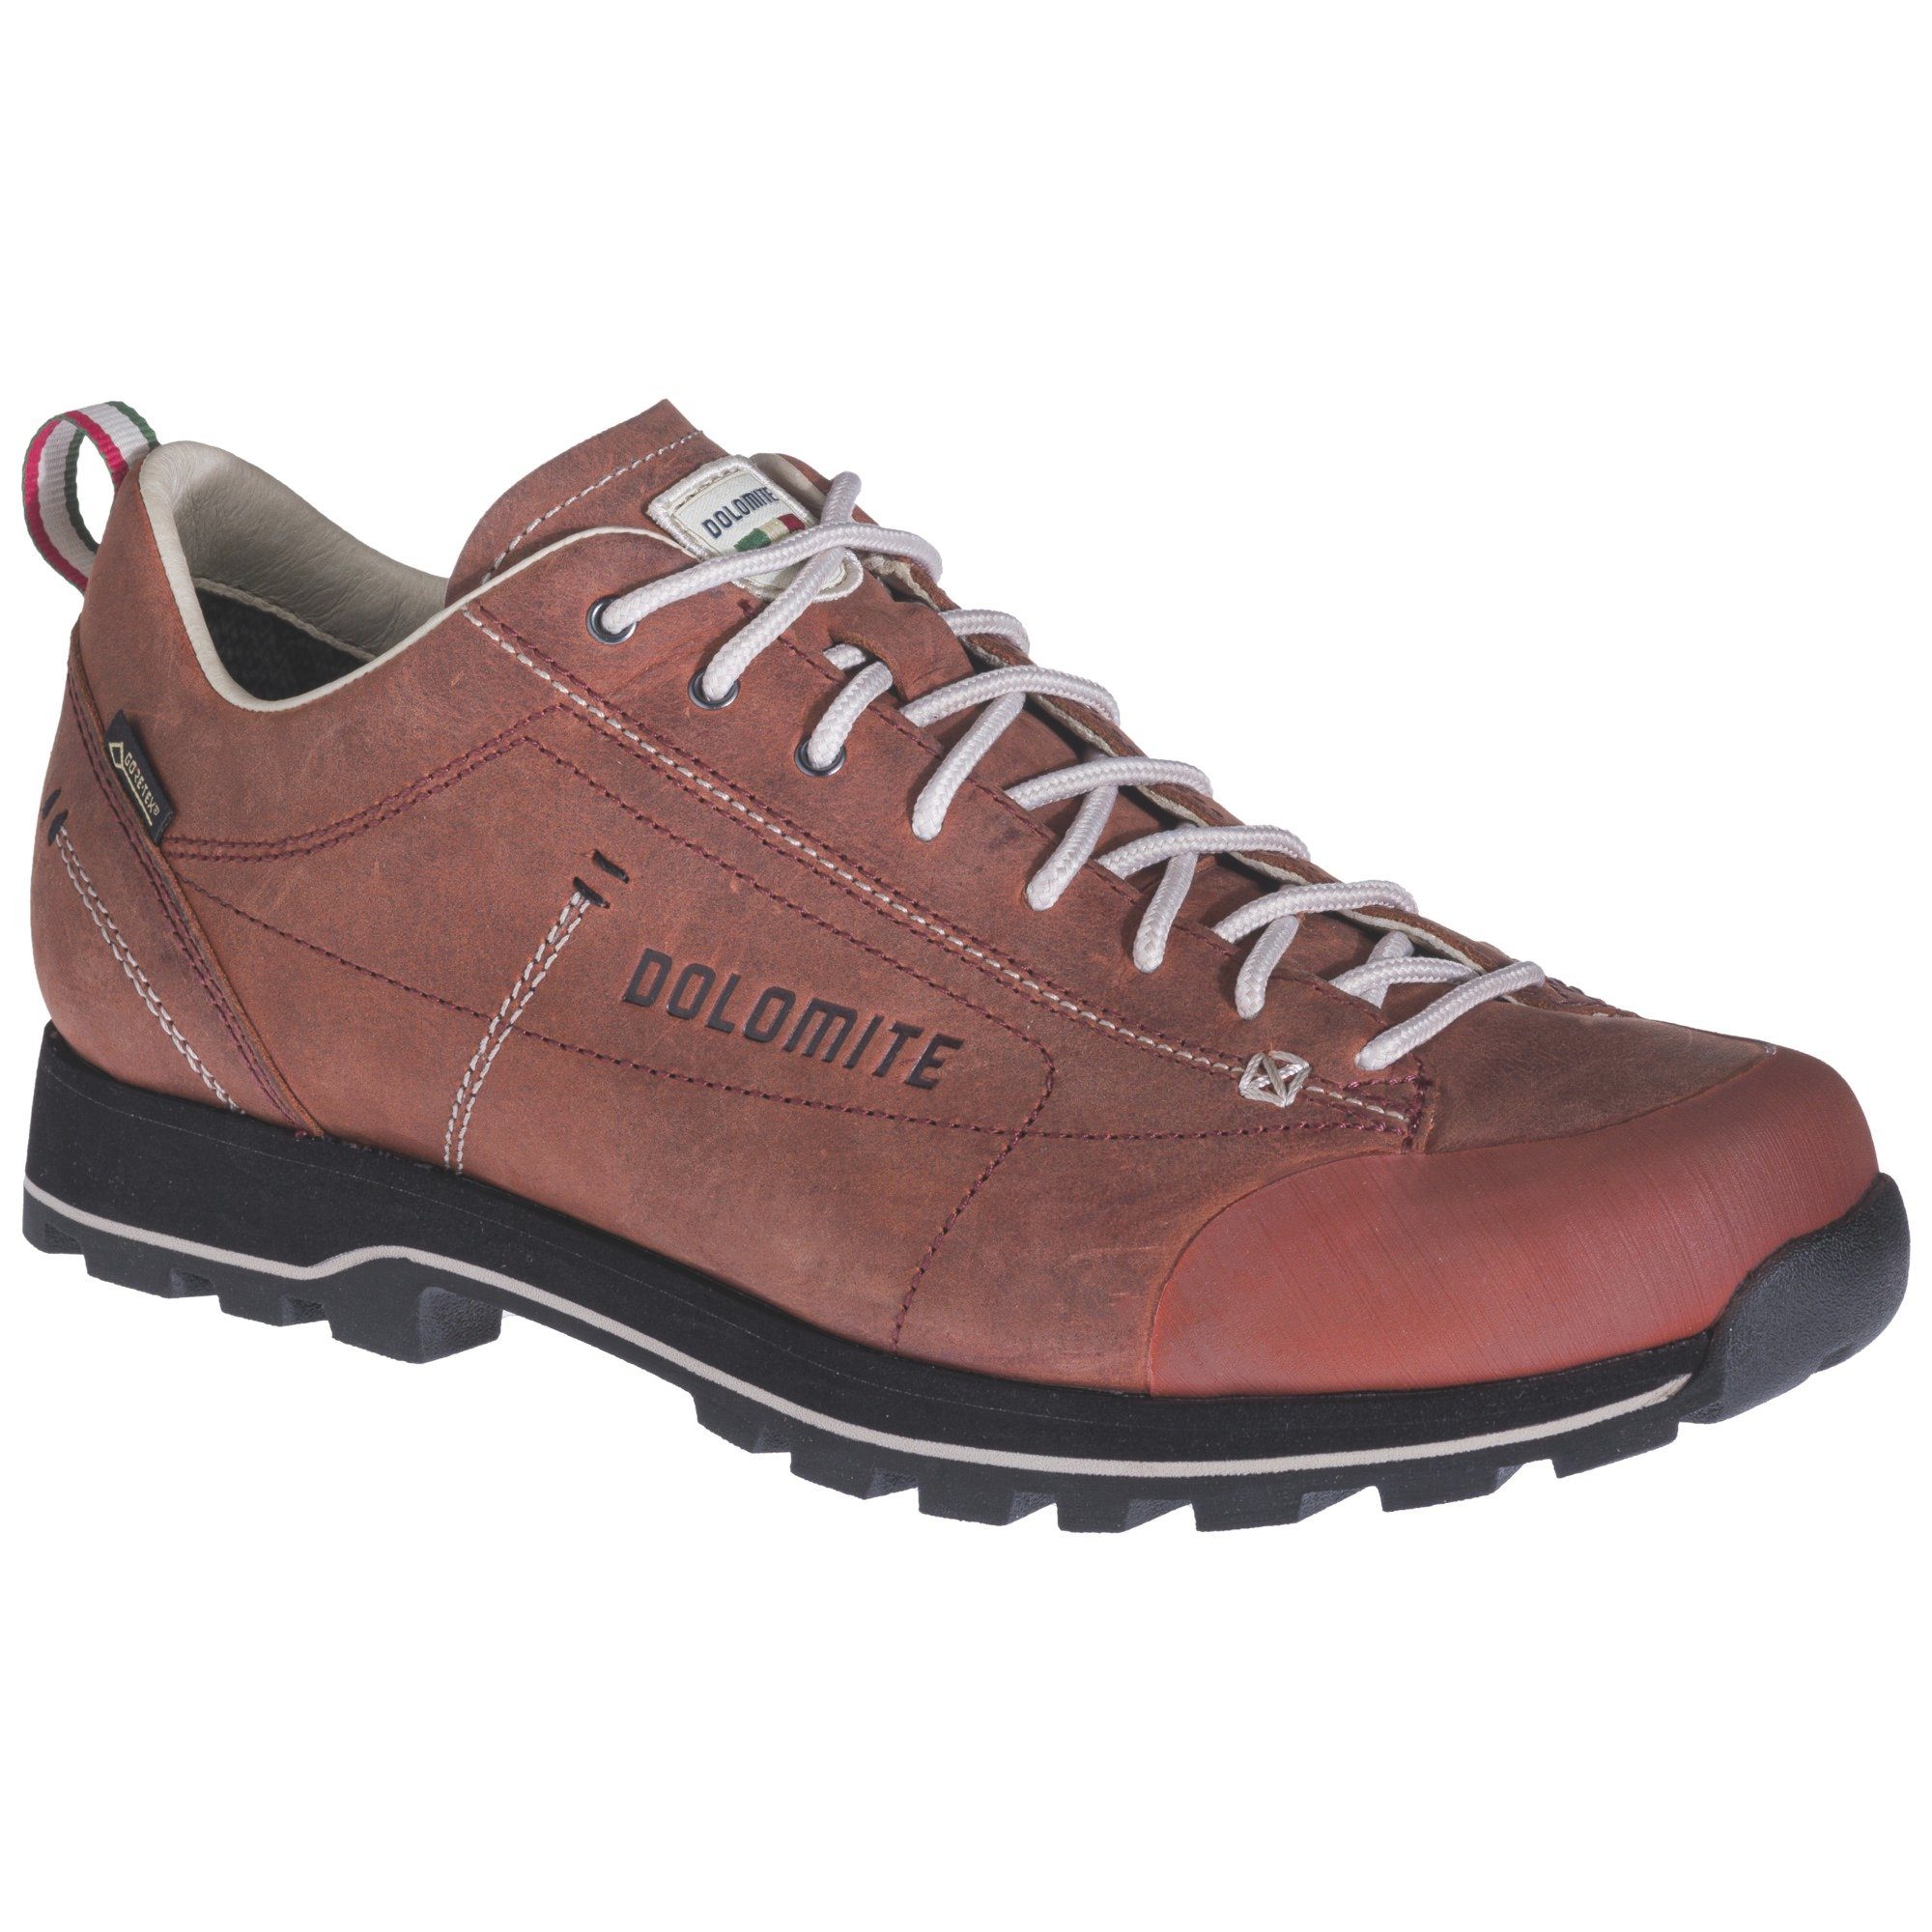 Shoe Cinquantaquattro Gt Dolomite Red DOL Low Fg Ginger Outdoorschuh Dolomite